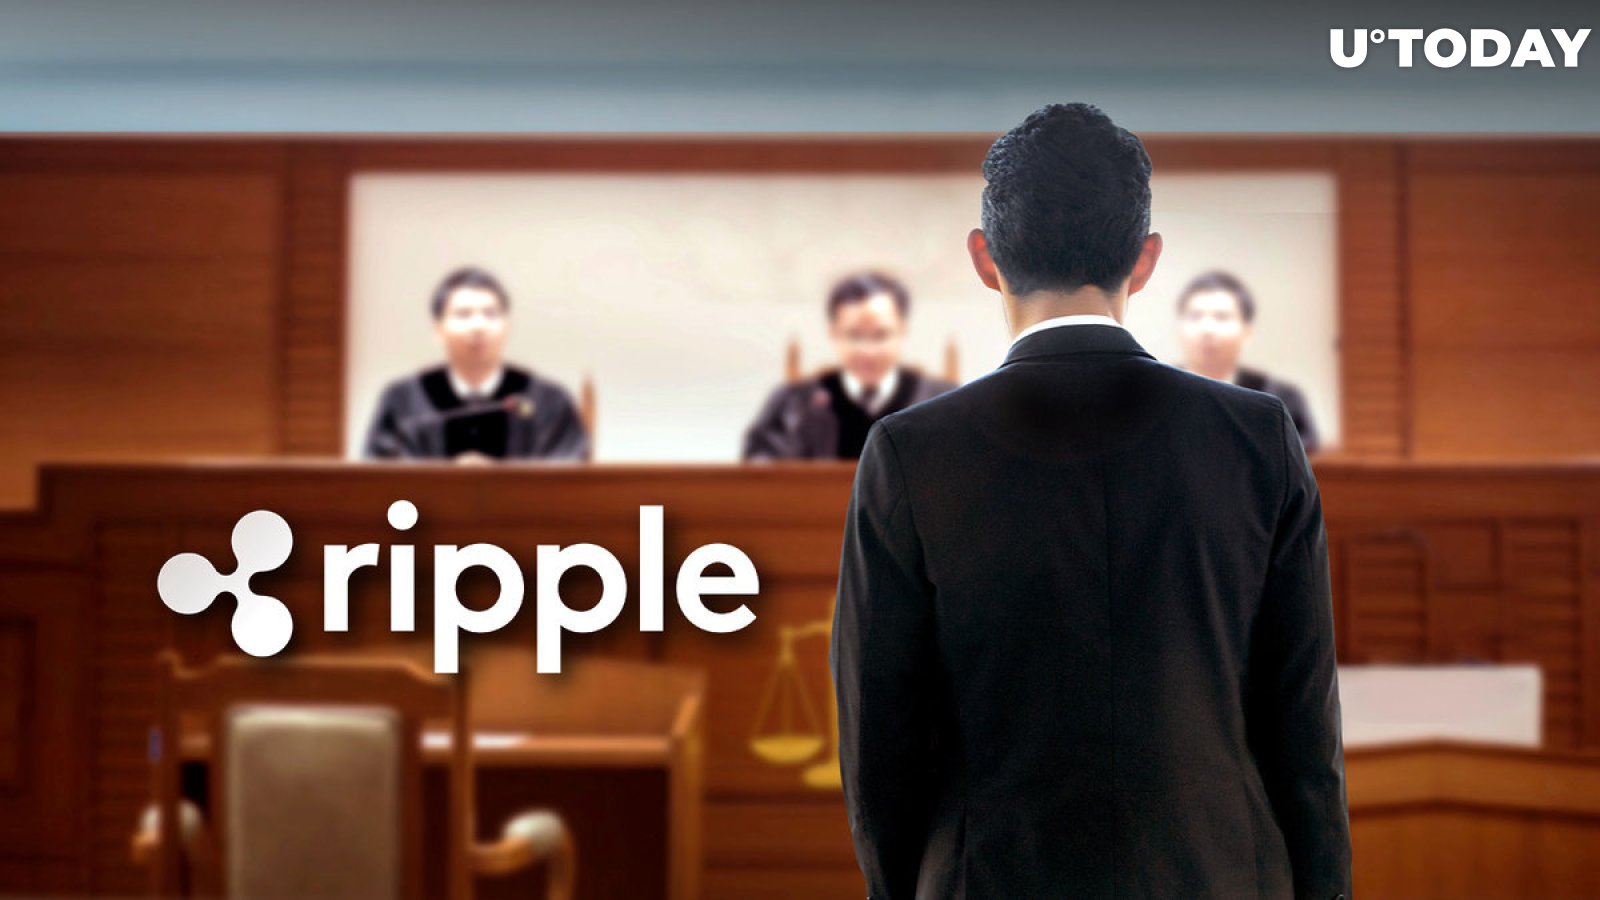 Ripple CEO's Attorney Withdraws From Case: Details